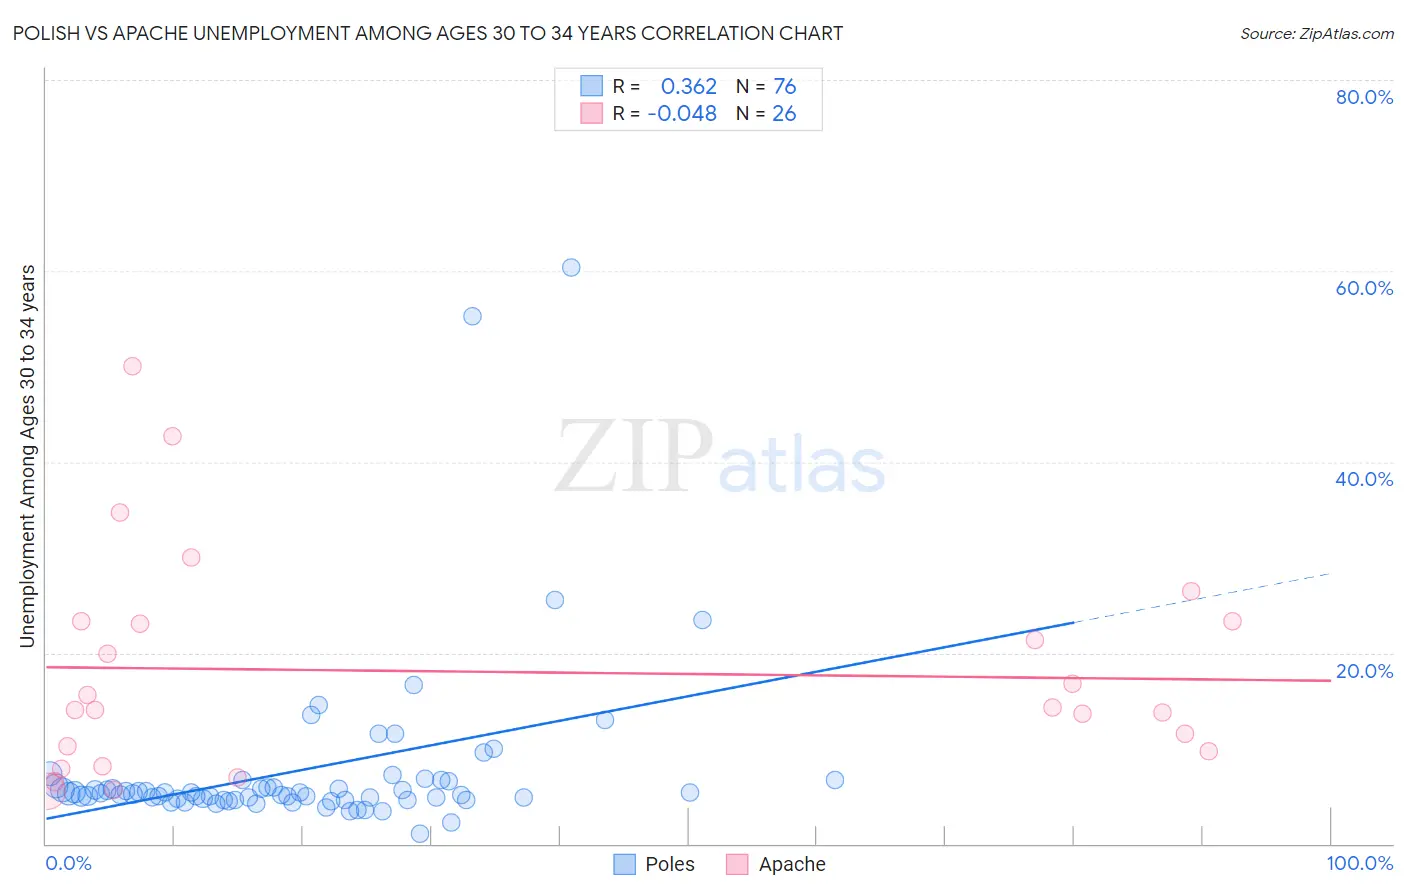 Polish vs Apache Unemployment Among Ages 30 to 34 years